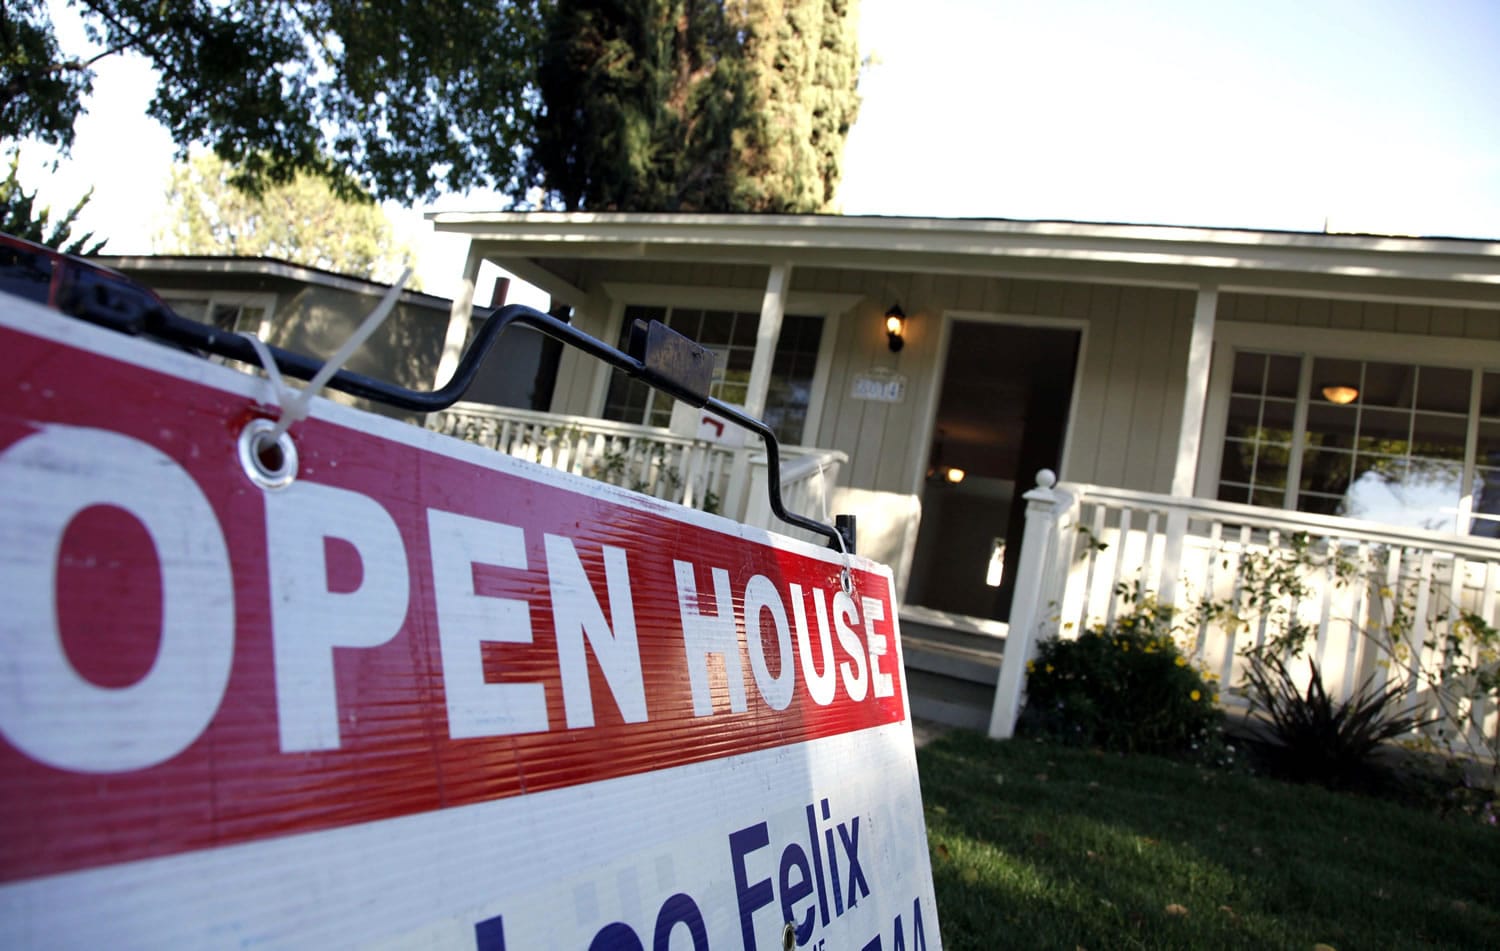 The number of Clark County homes sold in July rose 53.8 percent compared with July 2010, according to data compiled by Vancouver-based Riley &amp; Marks appraisal firm.